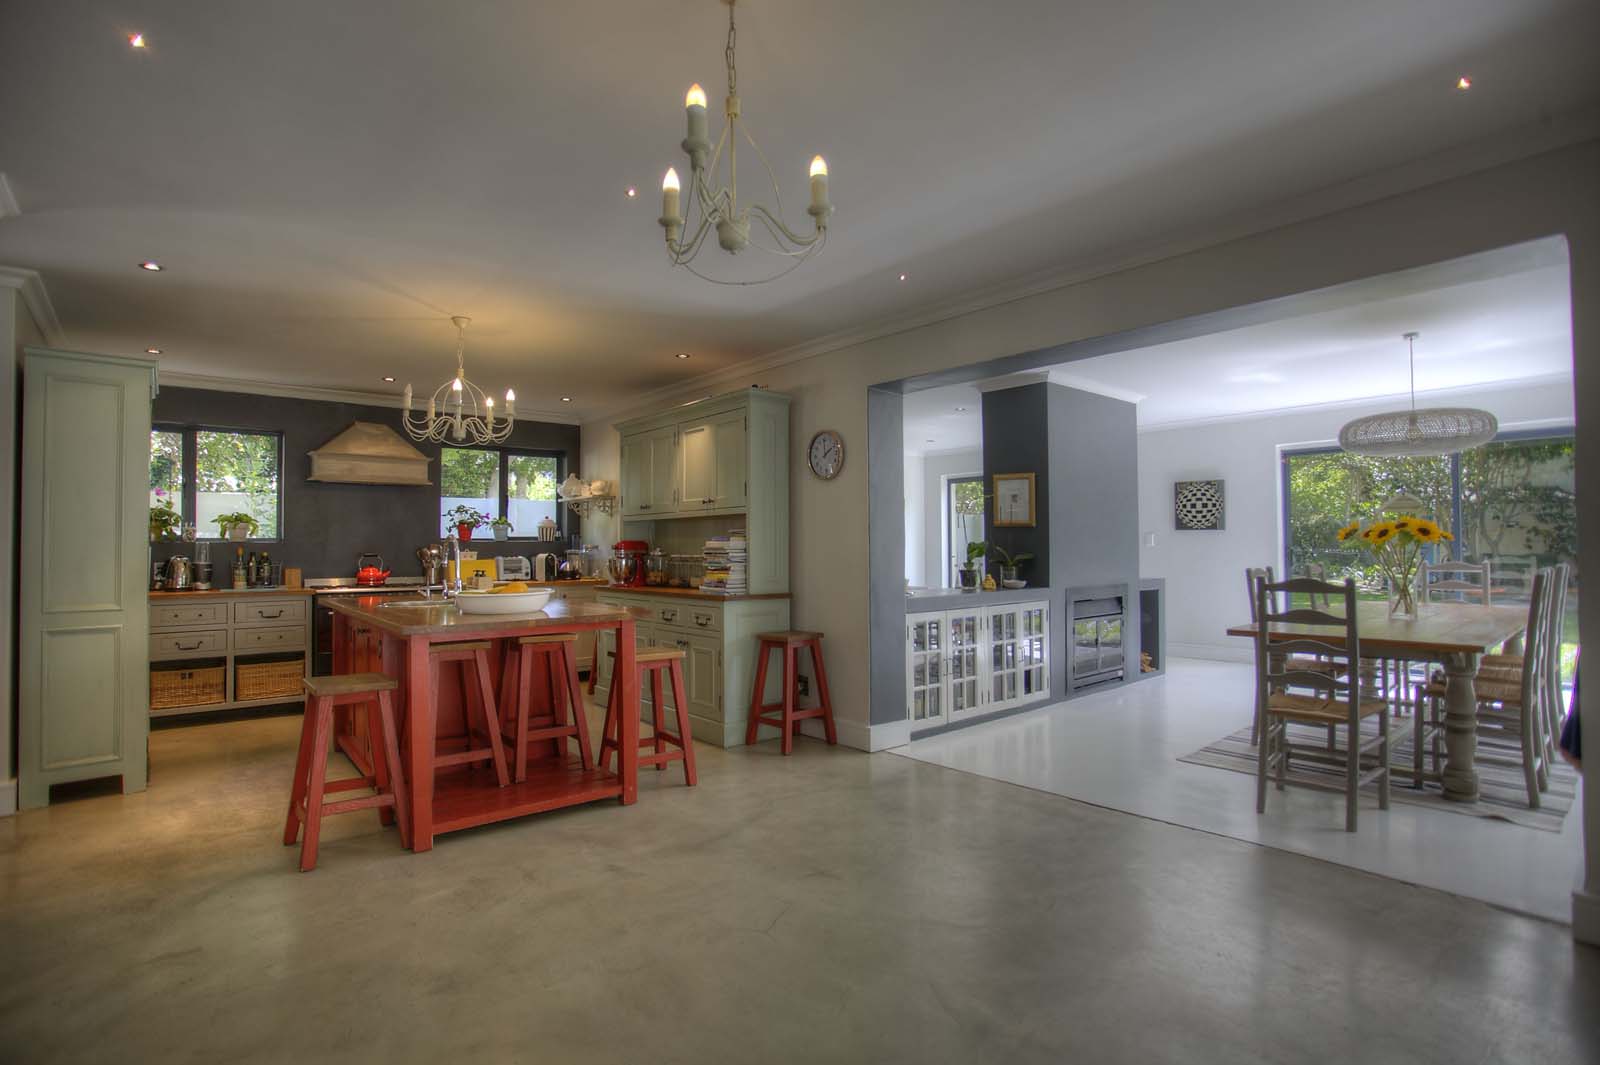 Photo 18 of Villa Robertson accommodation in Constantia, Cape Town with 4 bedrooms and 3 bathrooms